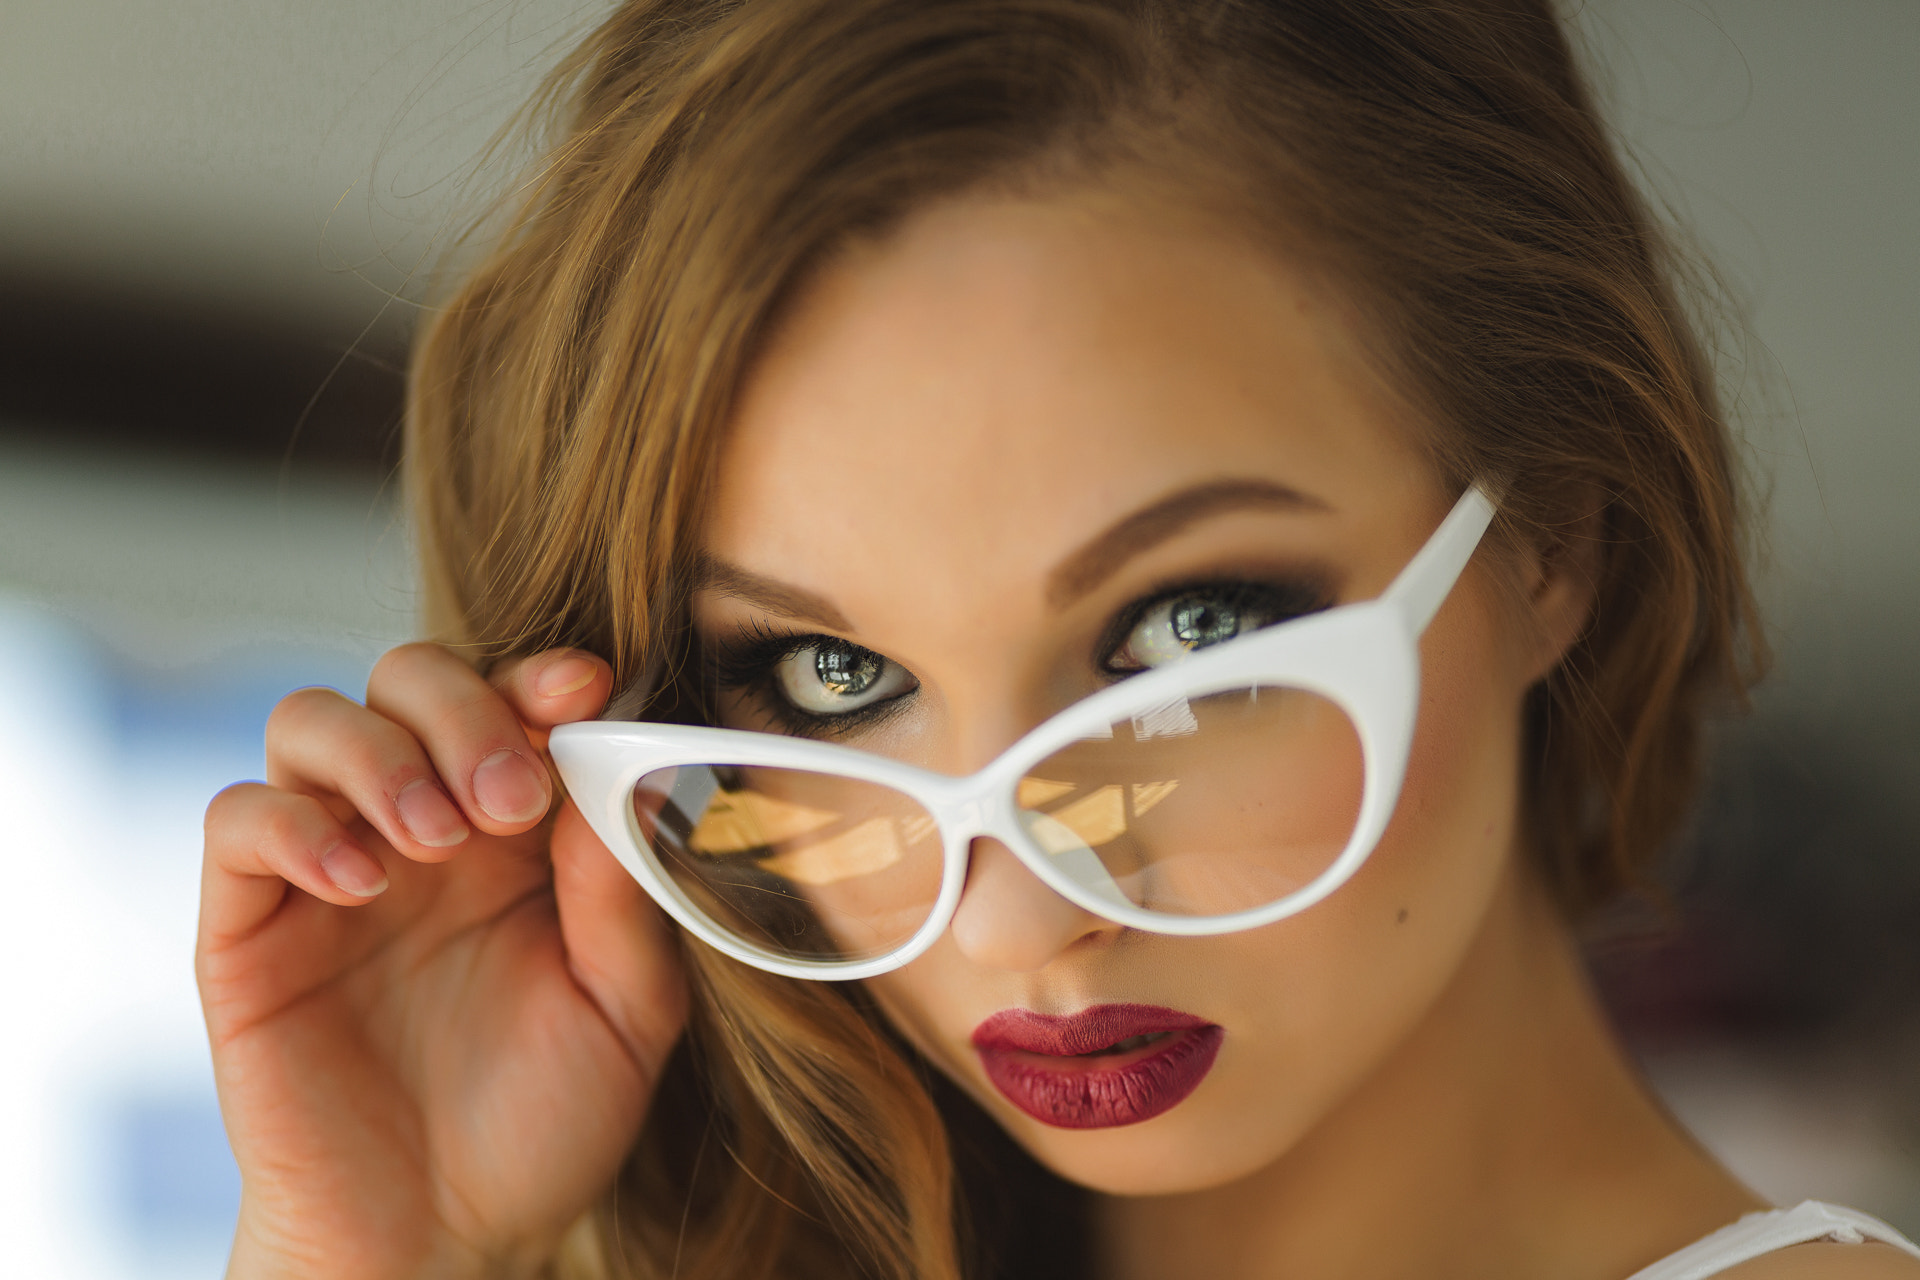 Women Blonde Red Lipstick Women With Glasses Face Portrait Touching Glasses 1920x1280